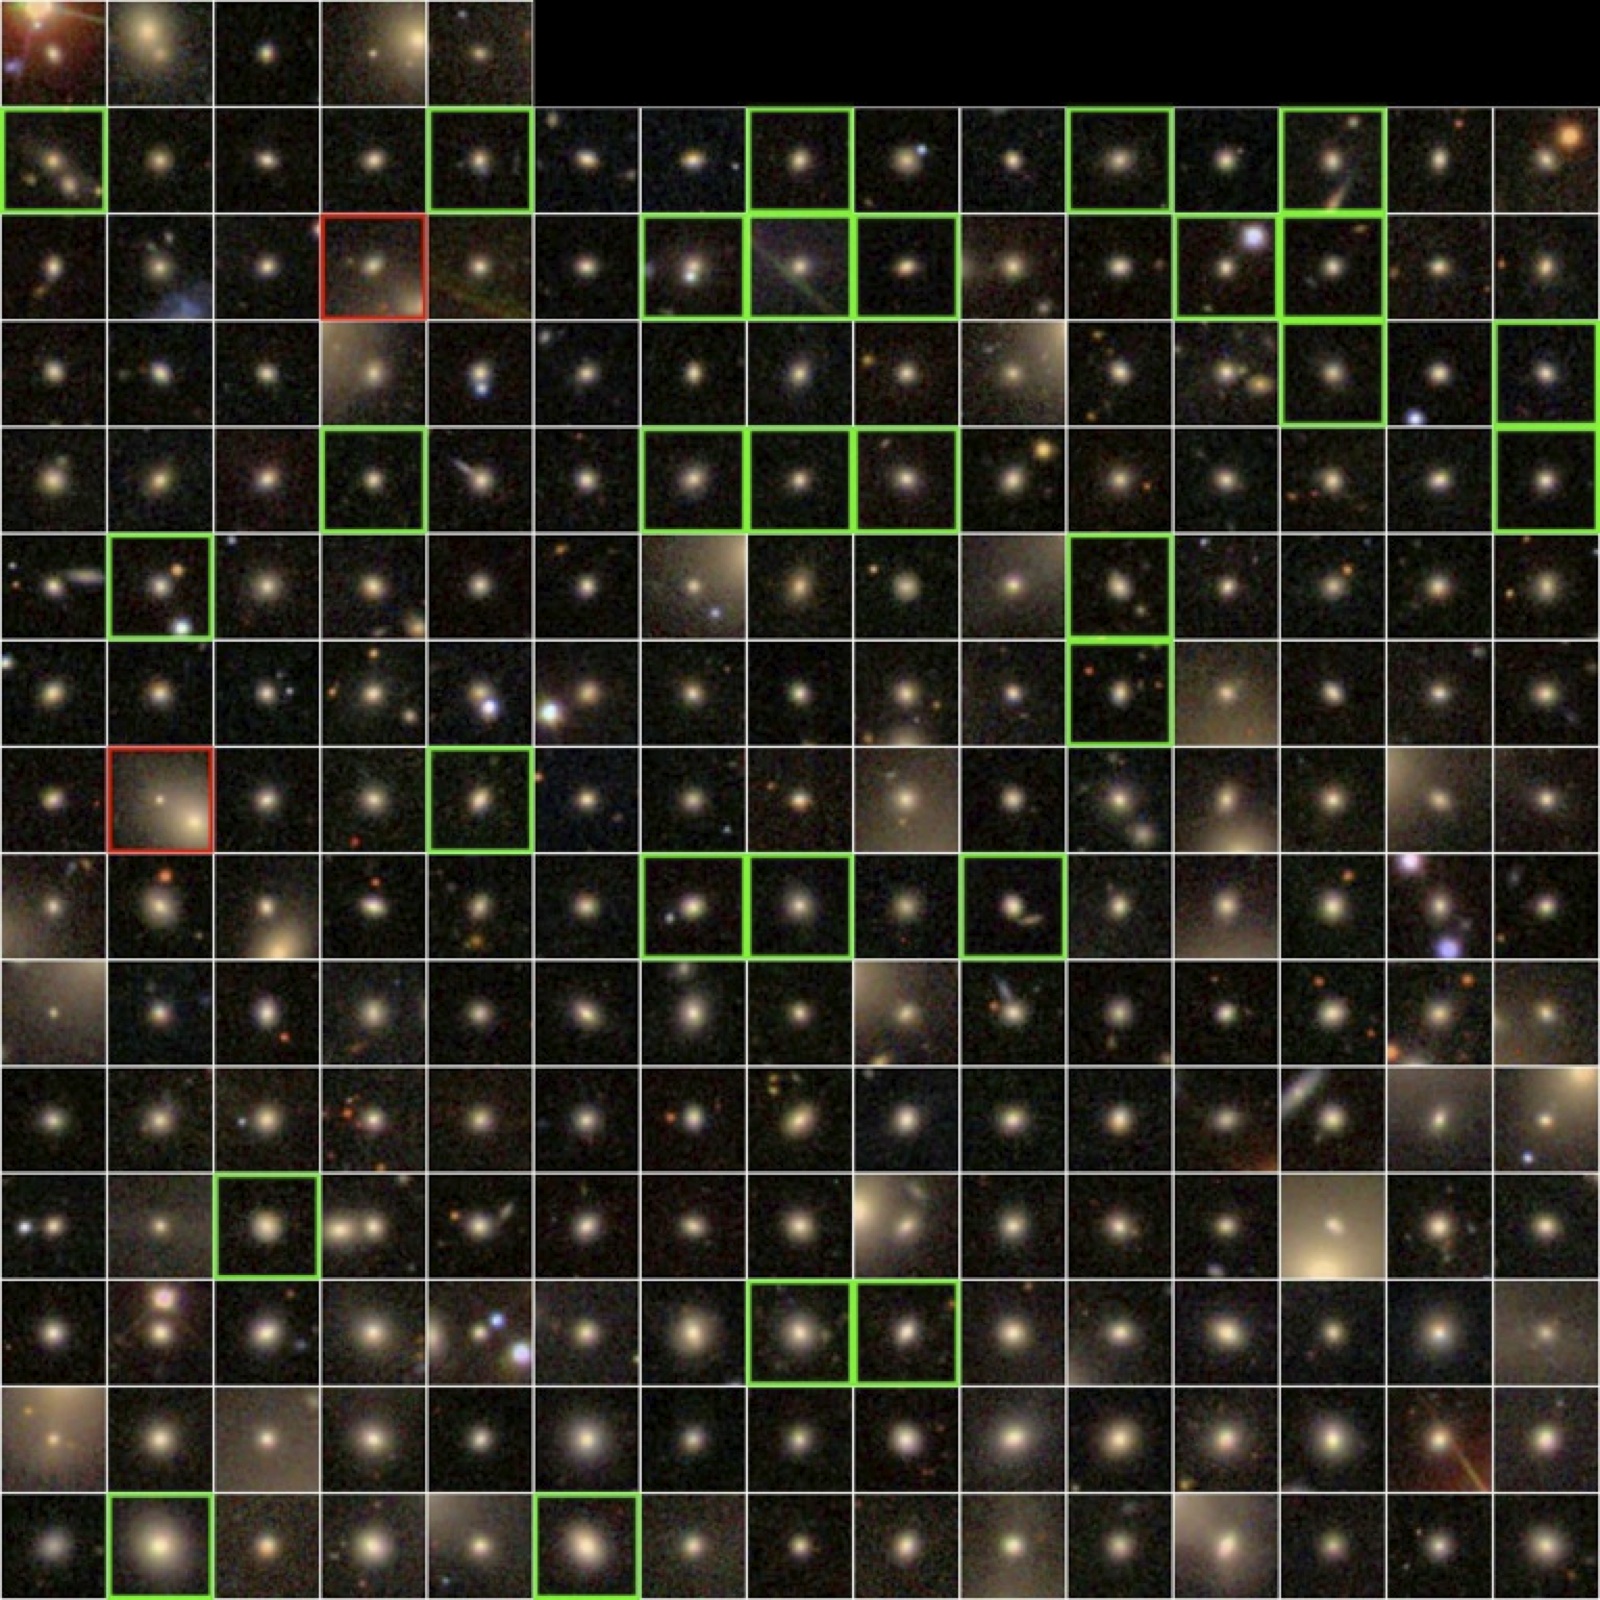 A mosaics of compact elliptical galaxies thumbnails that can be selected from the RCSED data following this step-by-step guide.